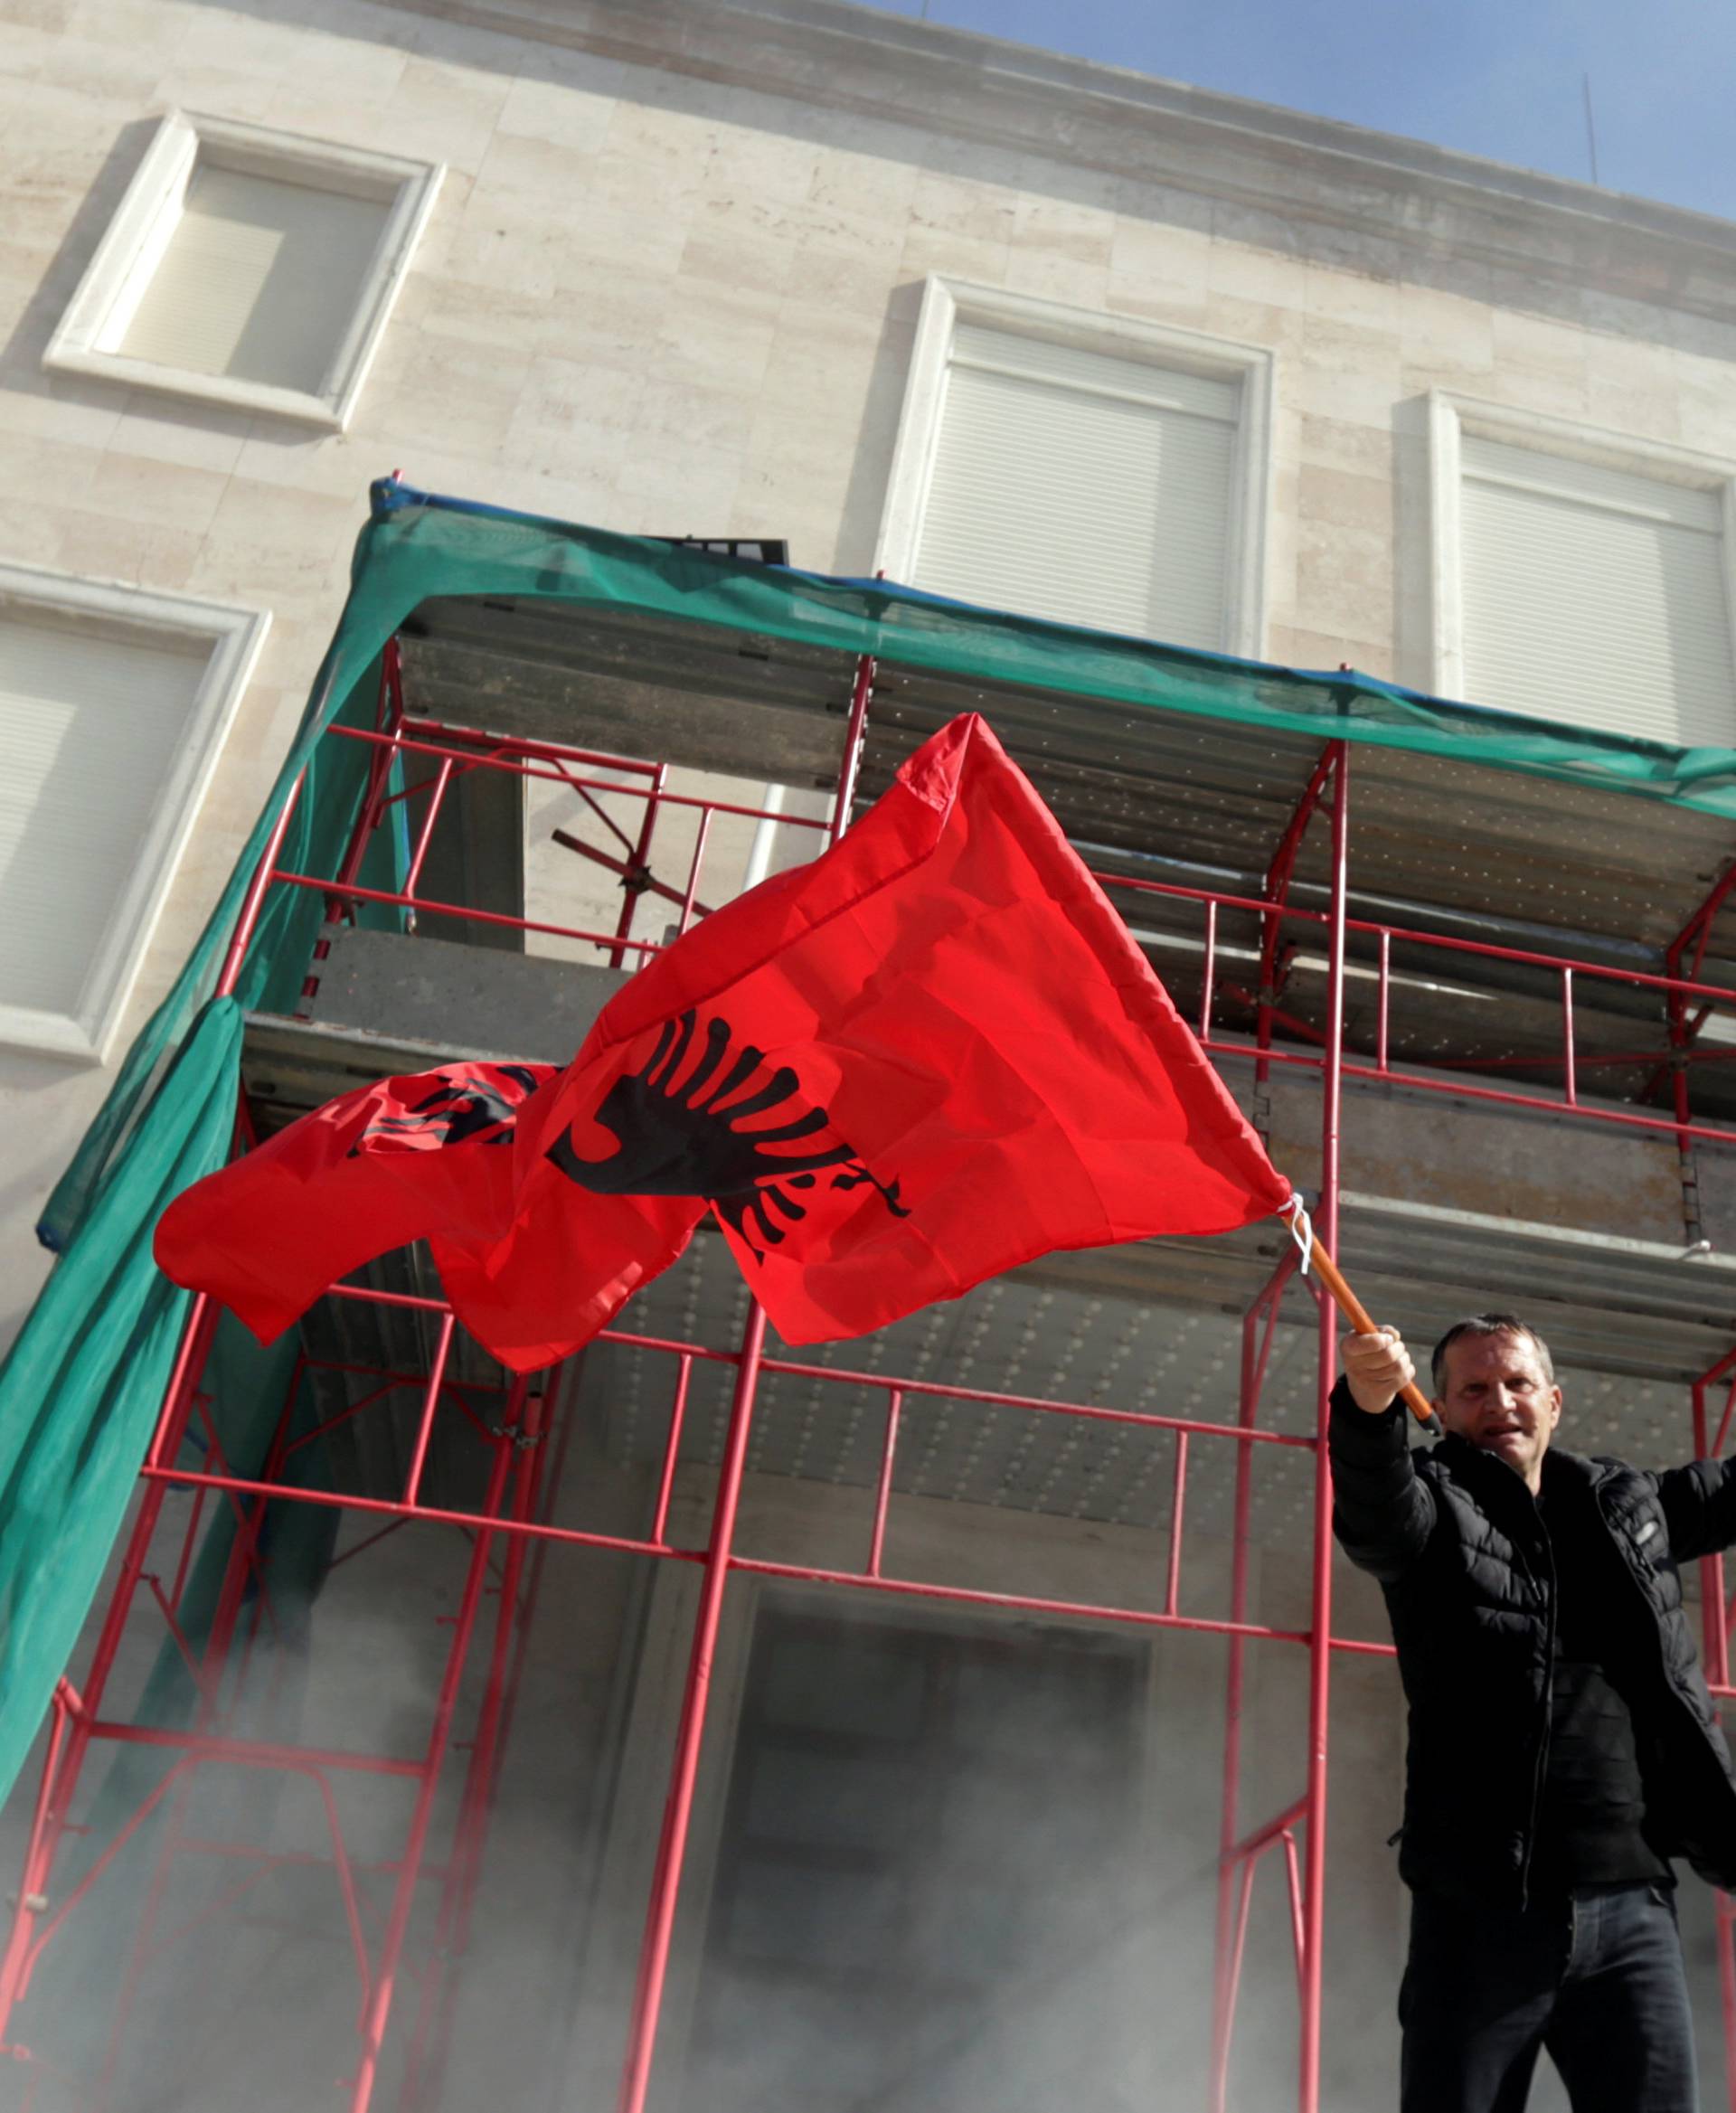 Albanian protesters try to break into government building